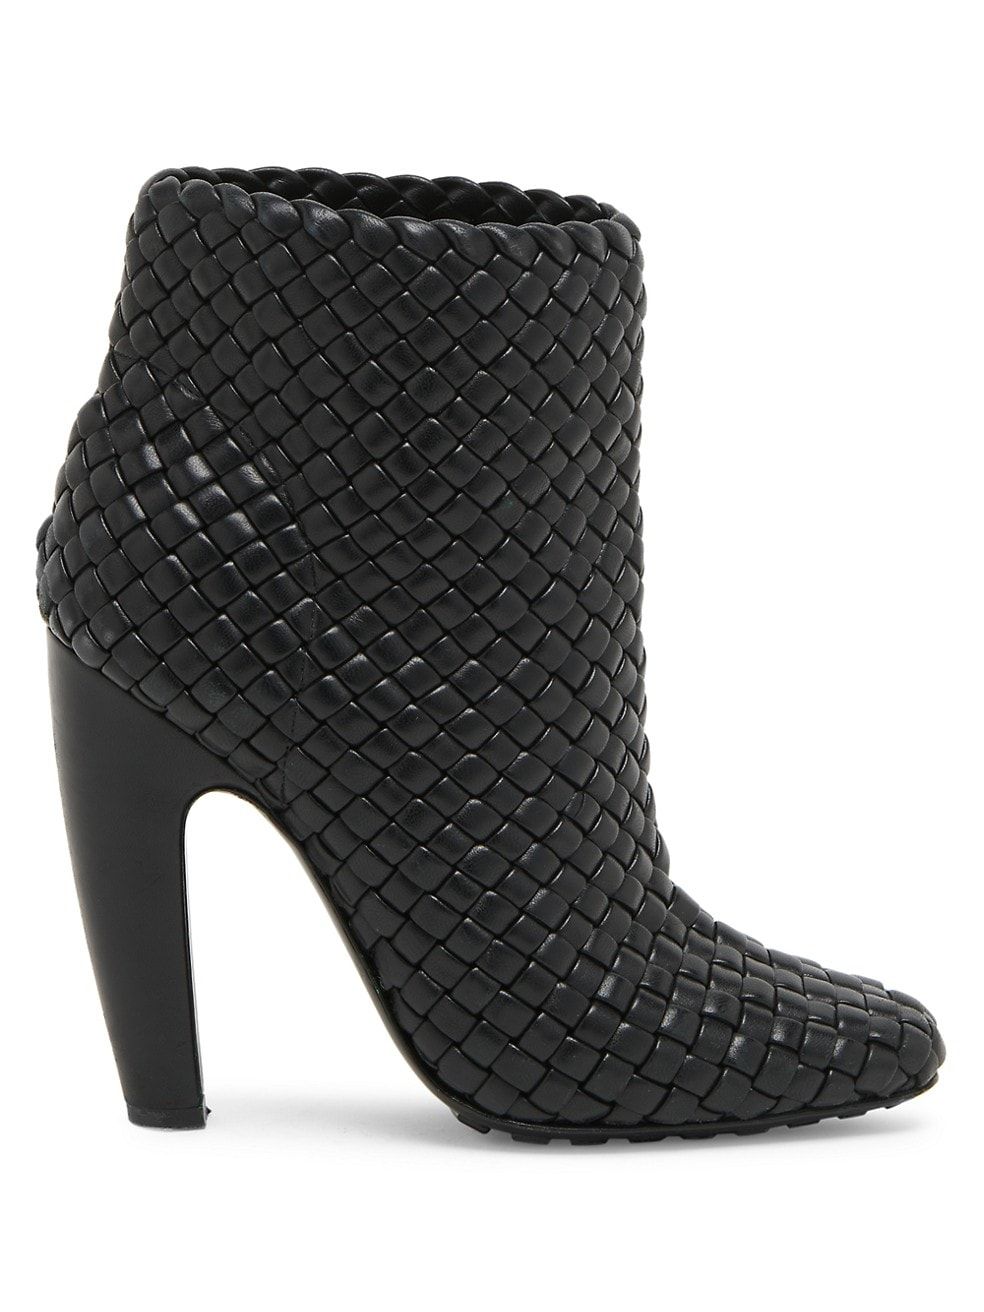 Woven Leather Ankle Boots | Saks Fifth Avenue